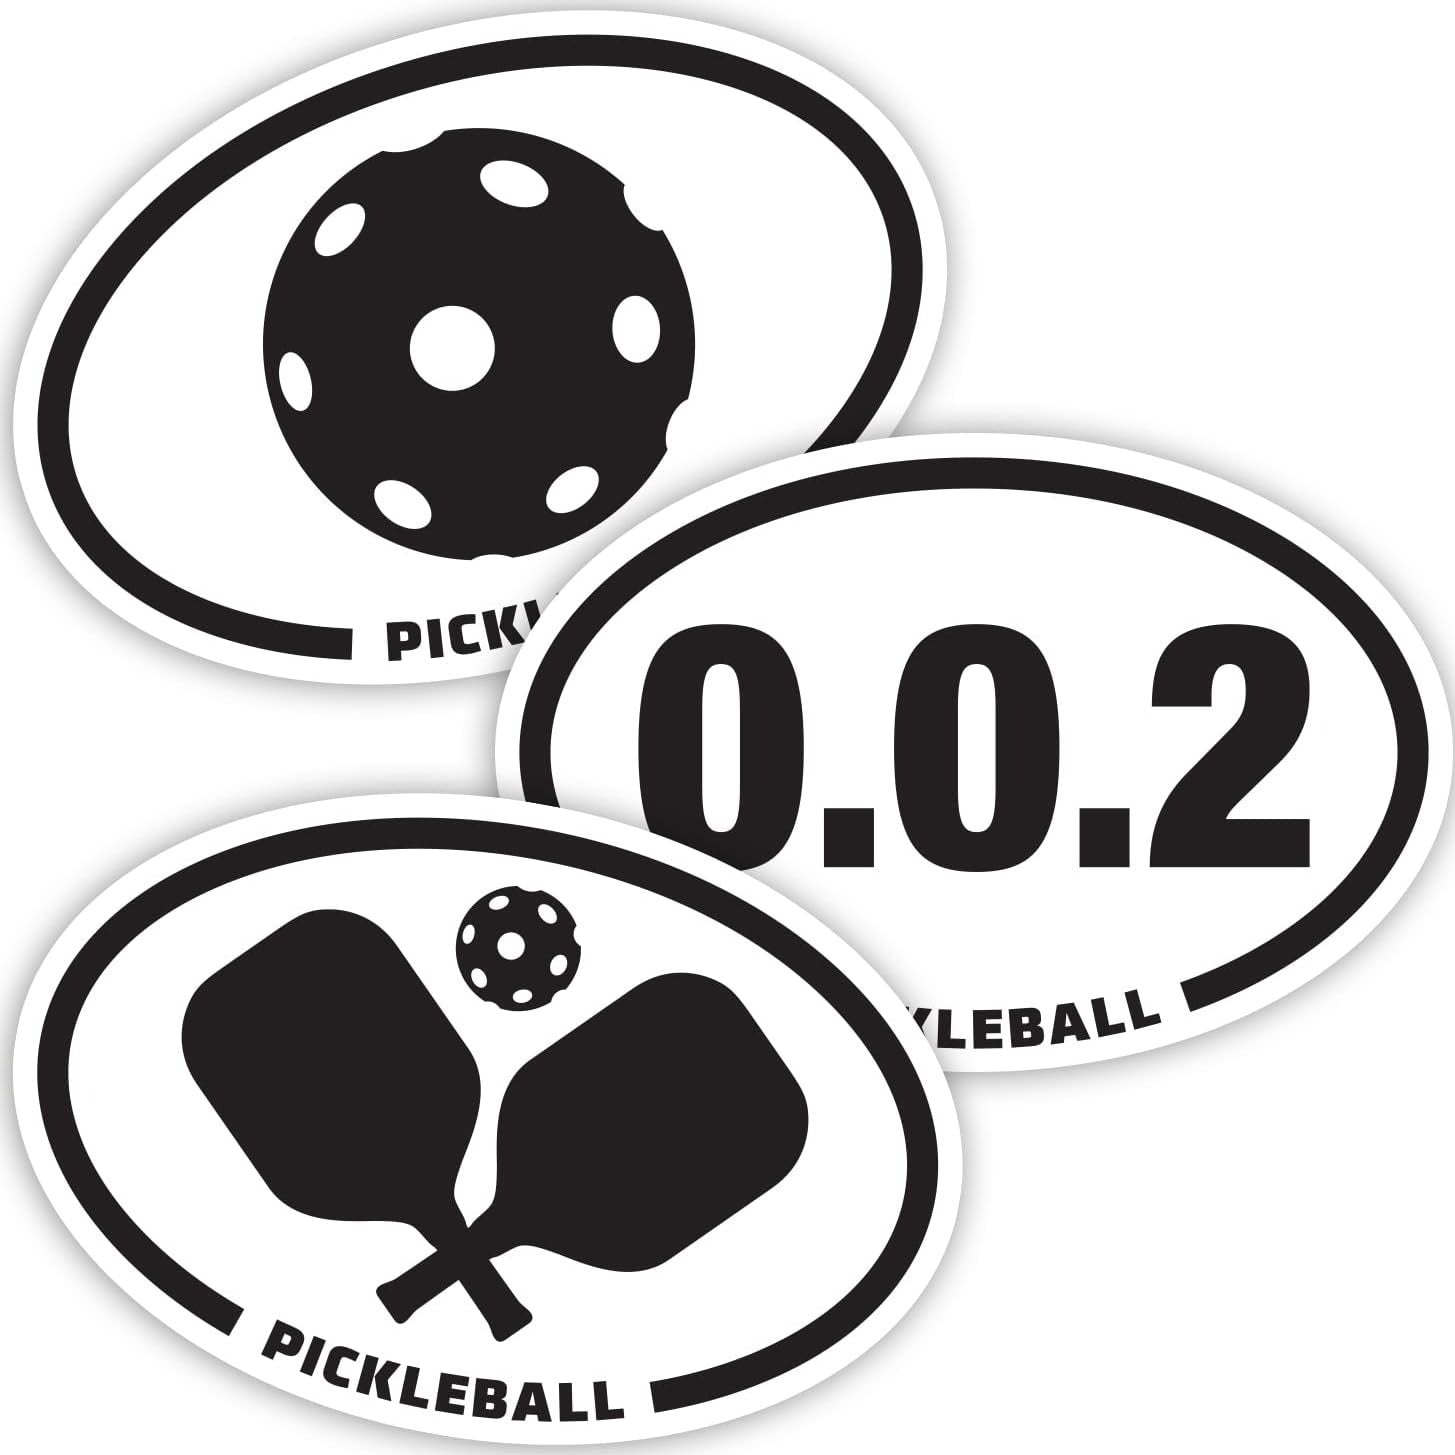 Oval Pickleball Decals